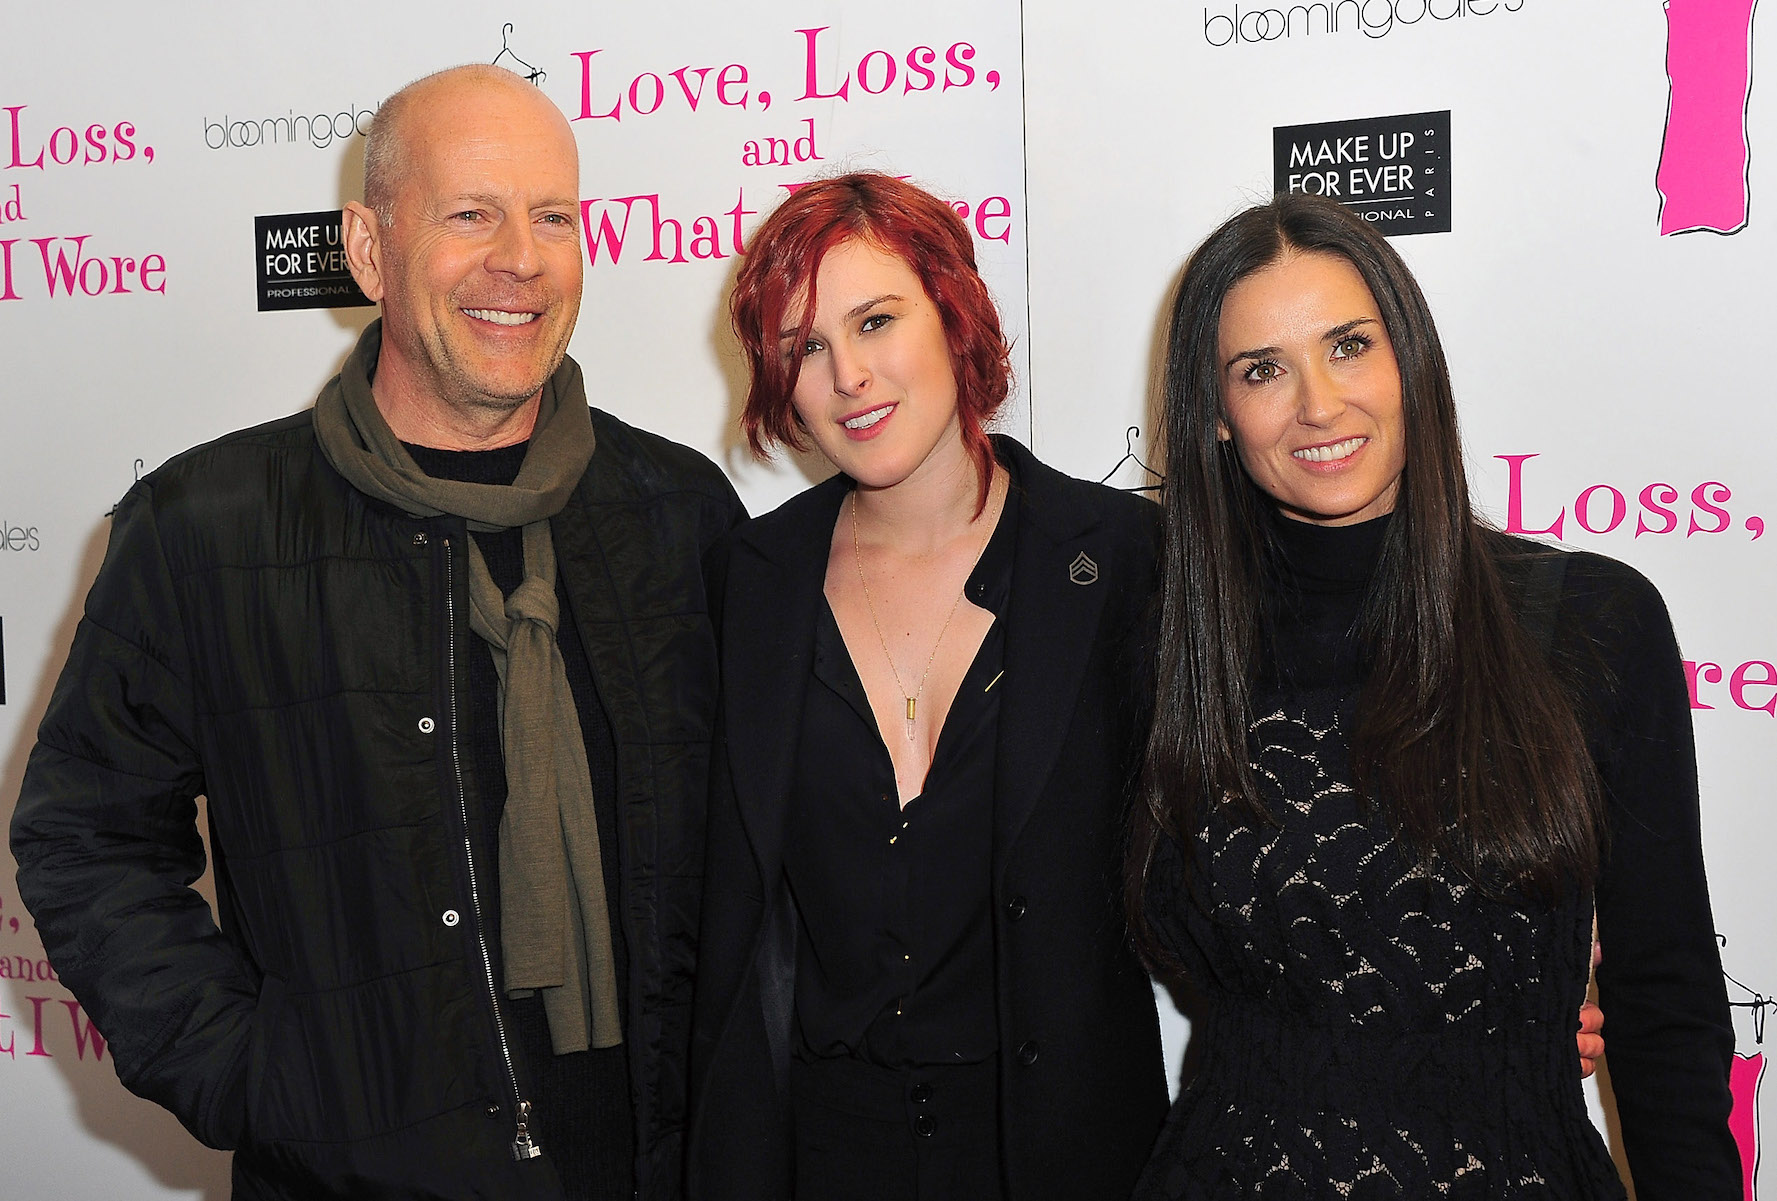 Bruce Willis, Rumer Willis, and Demi Moore standing together and smiling at an event